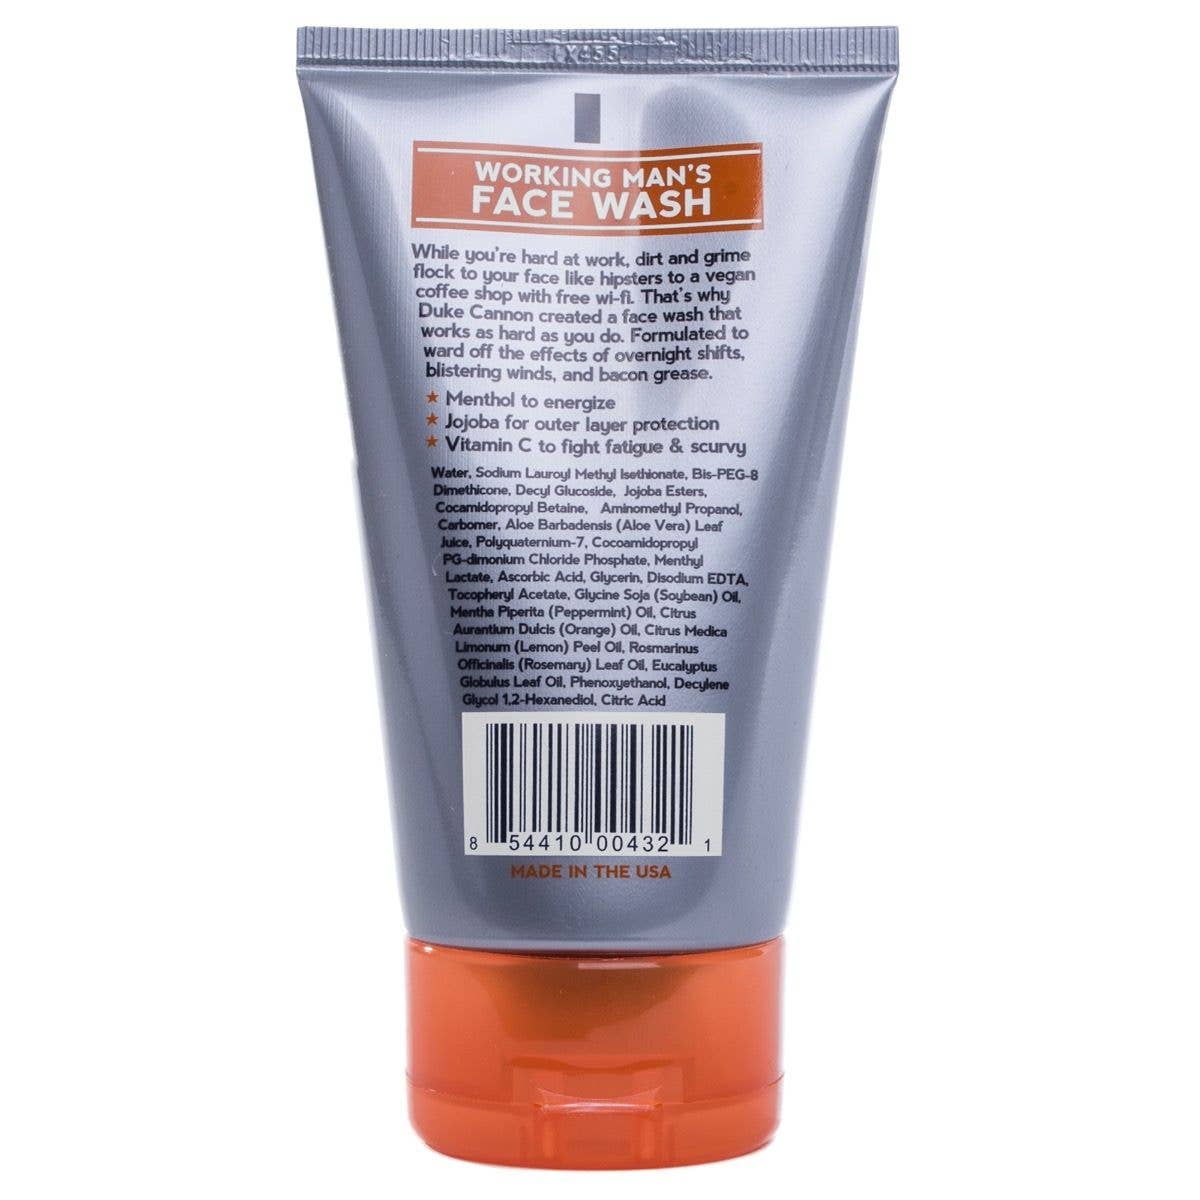 working man's face wash